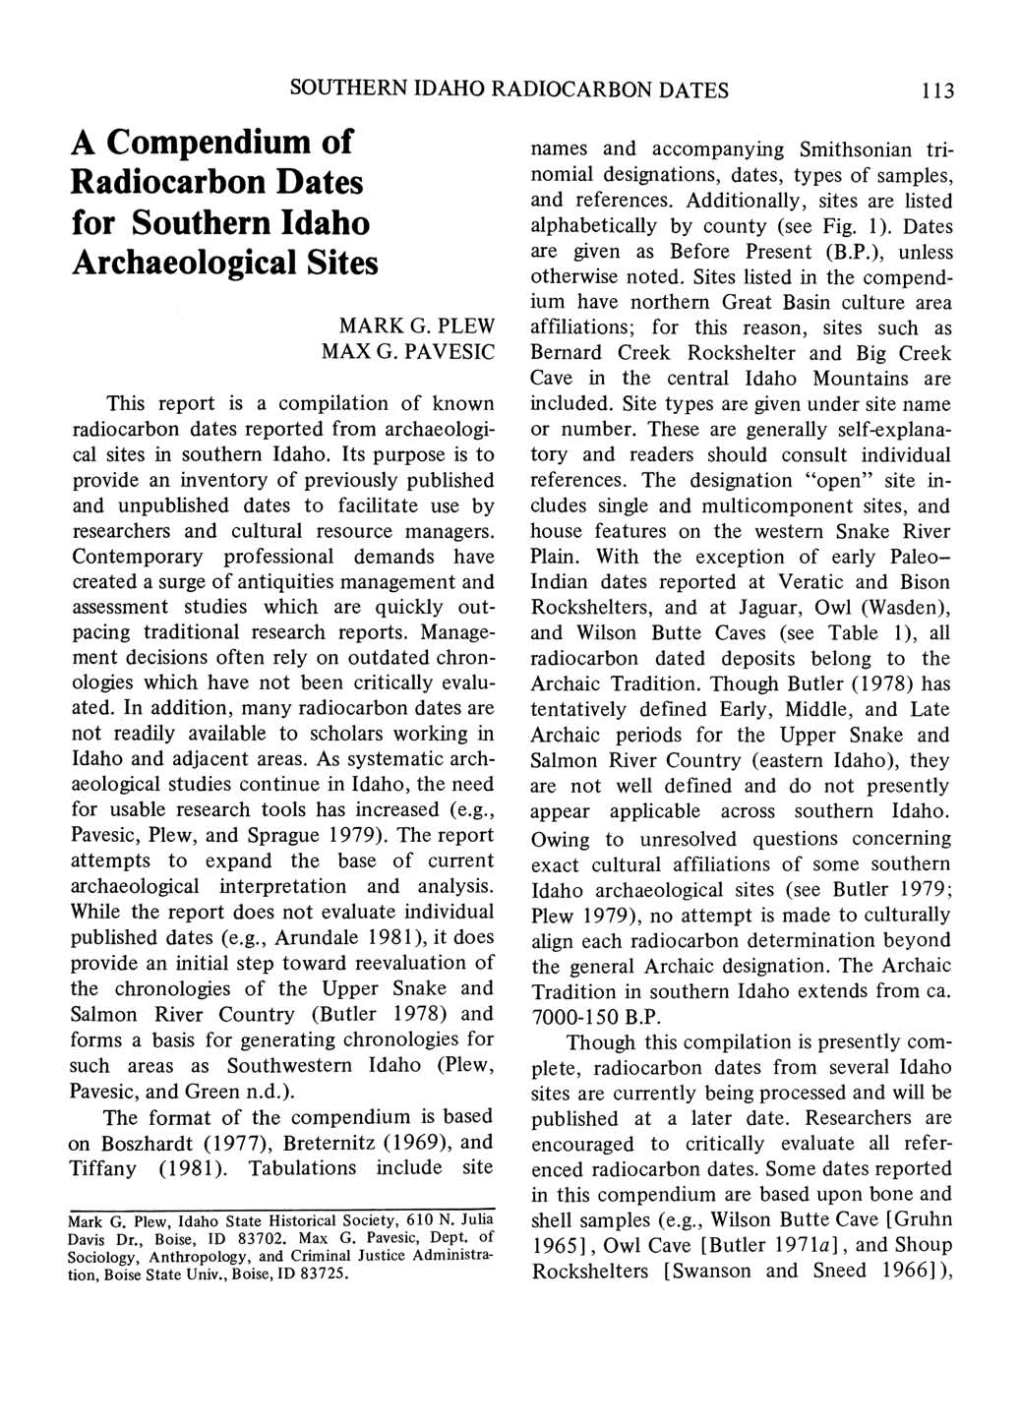 A Compendium of Radiocarbon Dates for Southern Idaho Archaeological